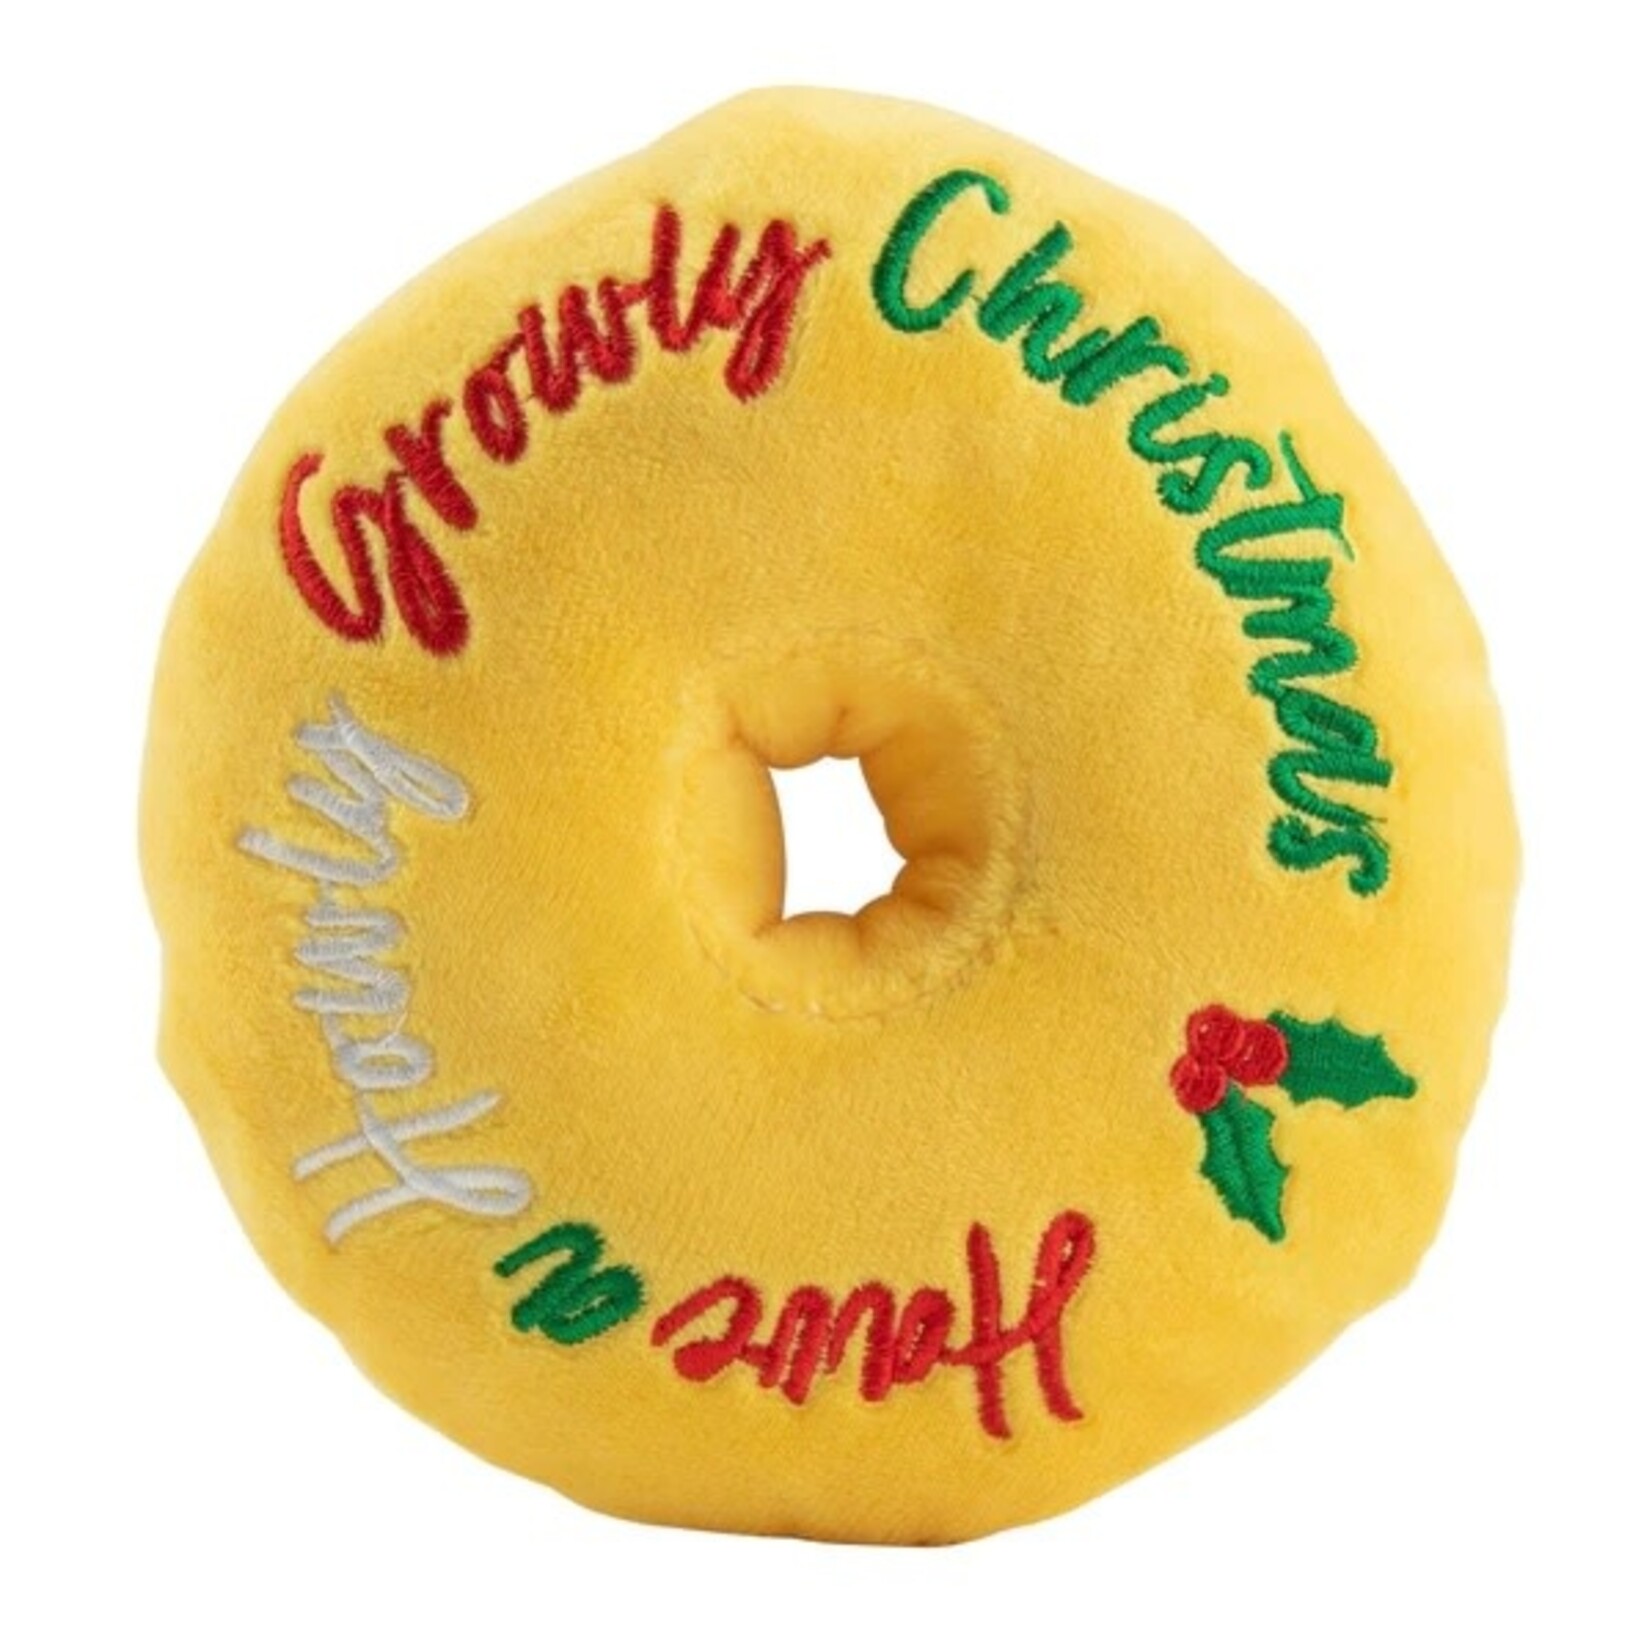 Haute Diggity Dog Puppermint Donut Dog Toy